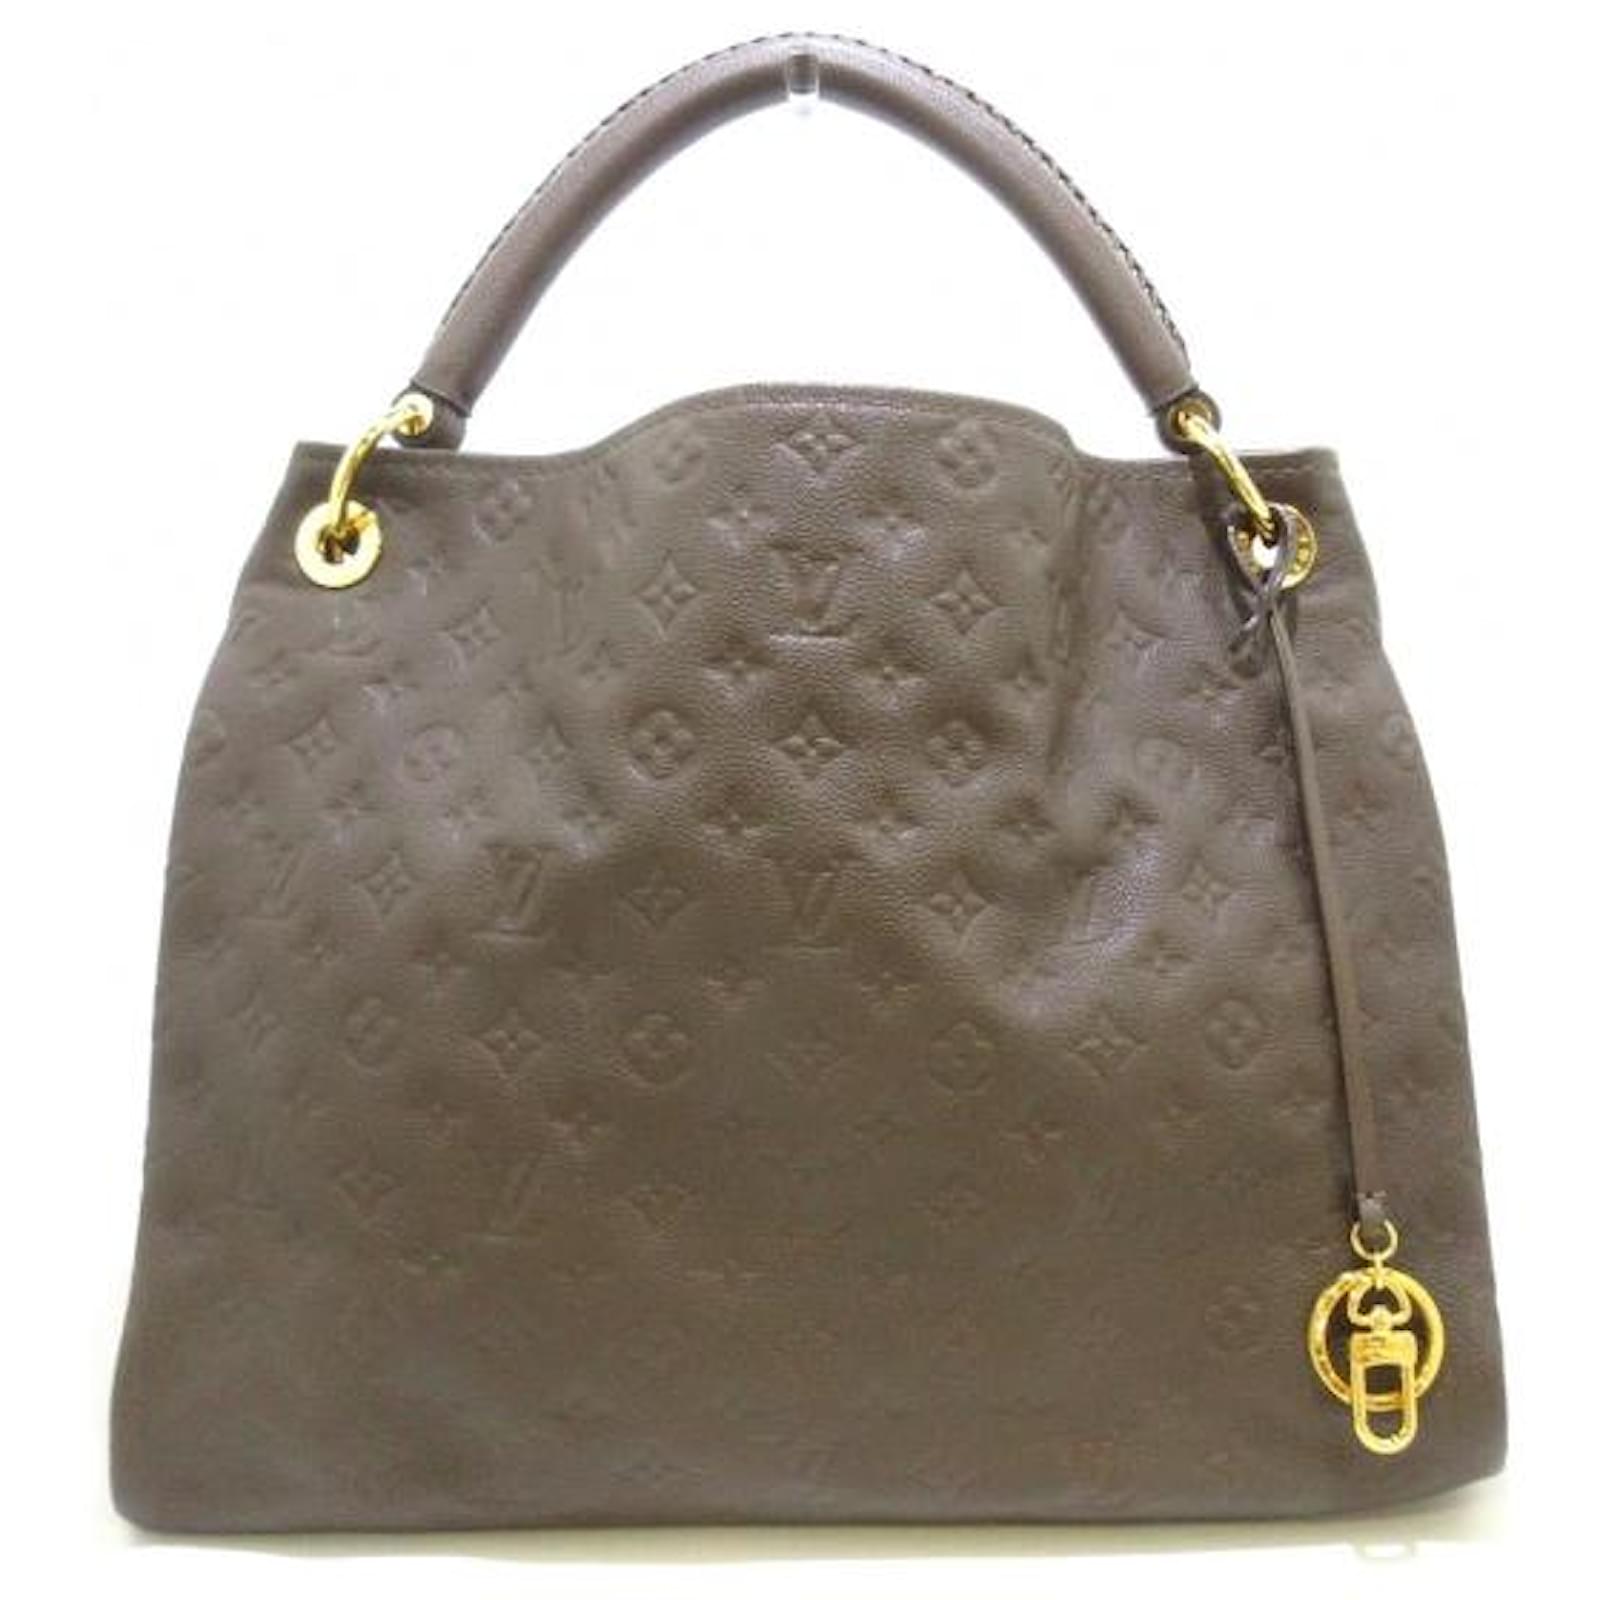 Louis Vuitton Artsy MM Monogram: Pros & Cons / Cracking / How to